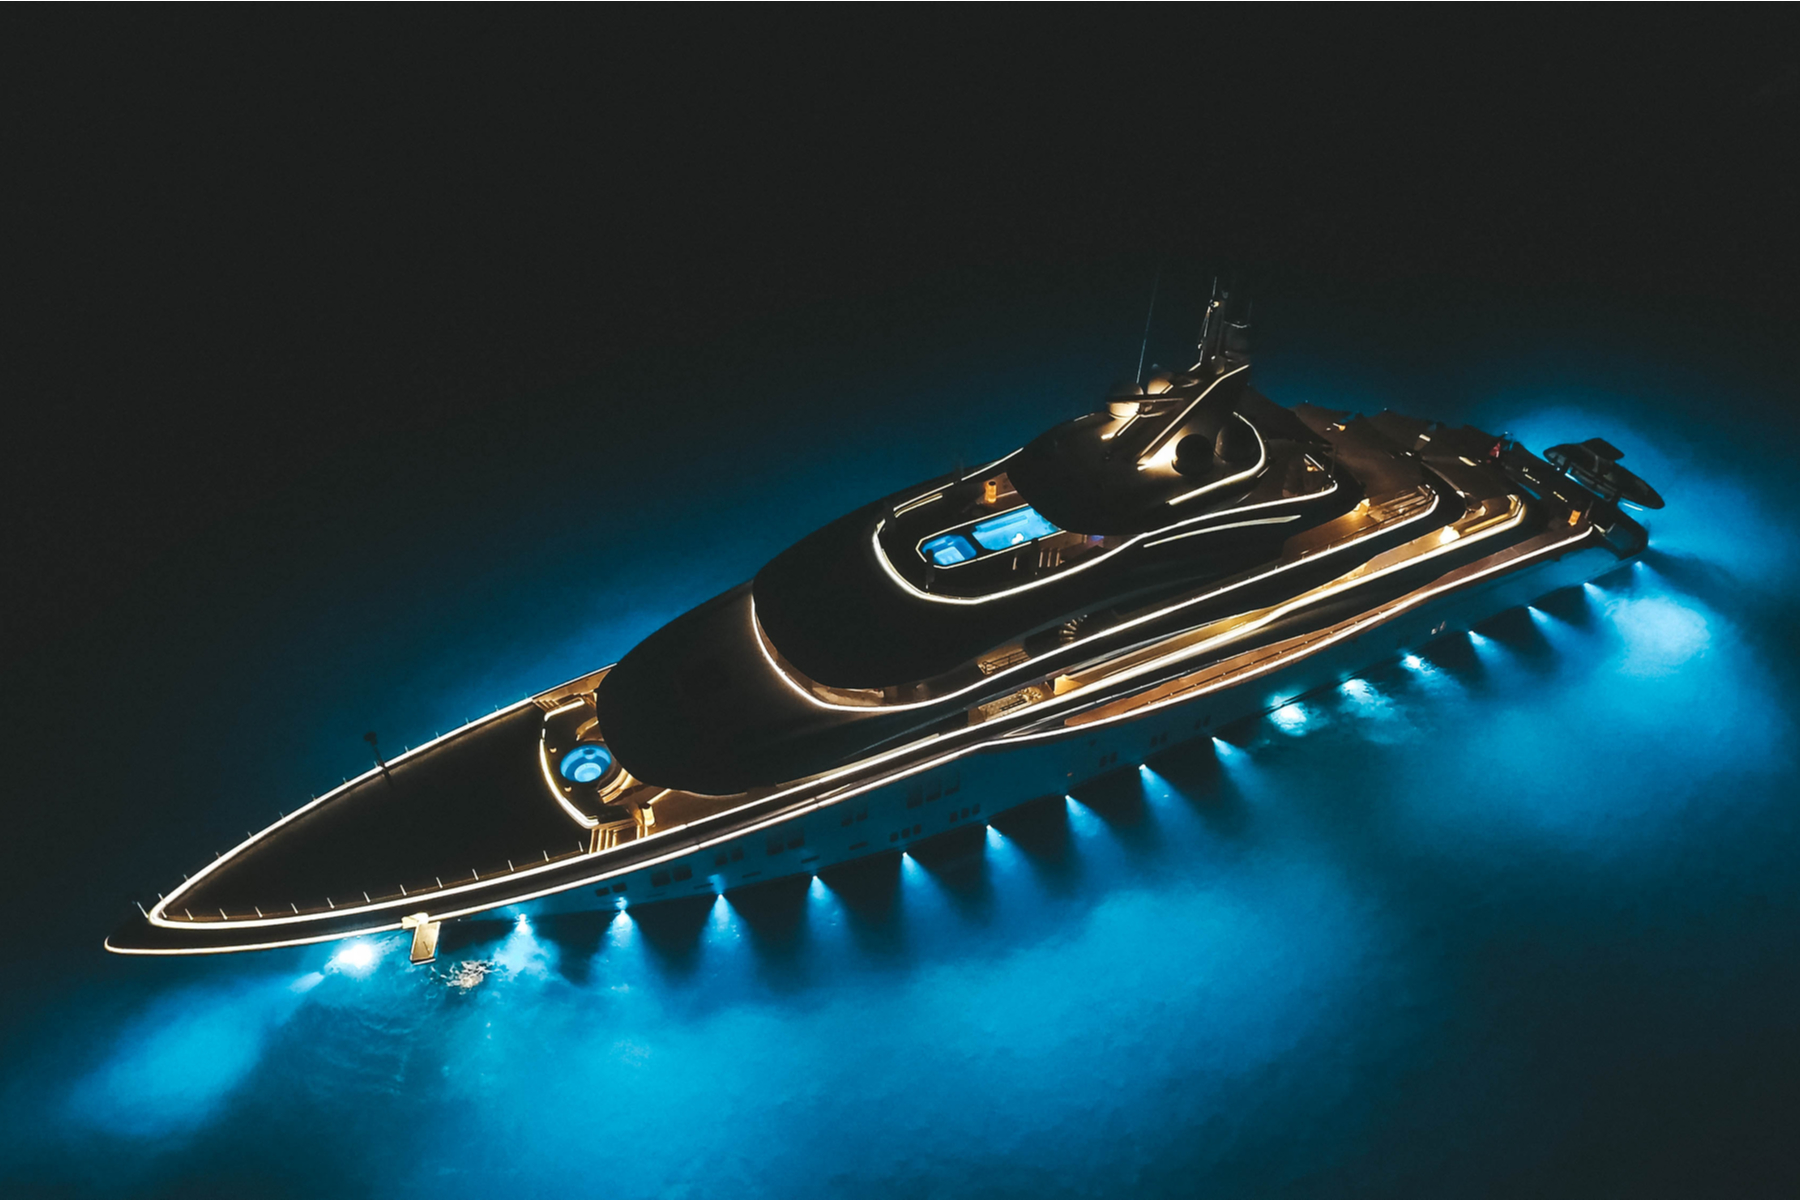 Leading Yachts of the World gears up for Asia Pacific launch